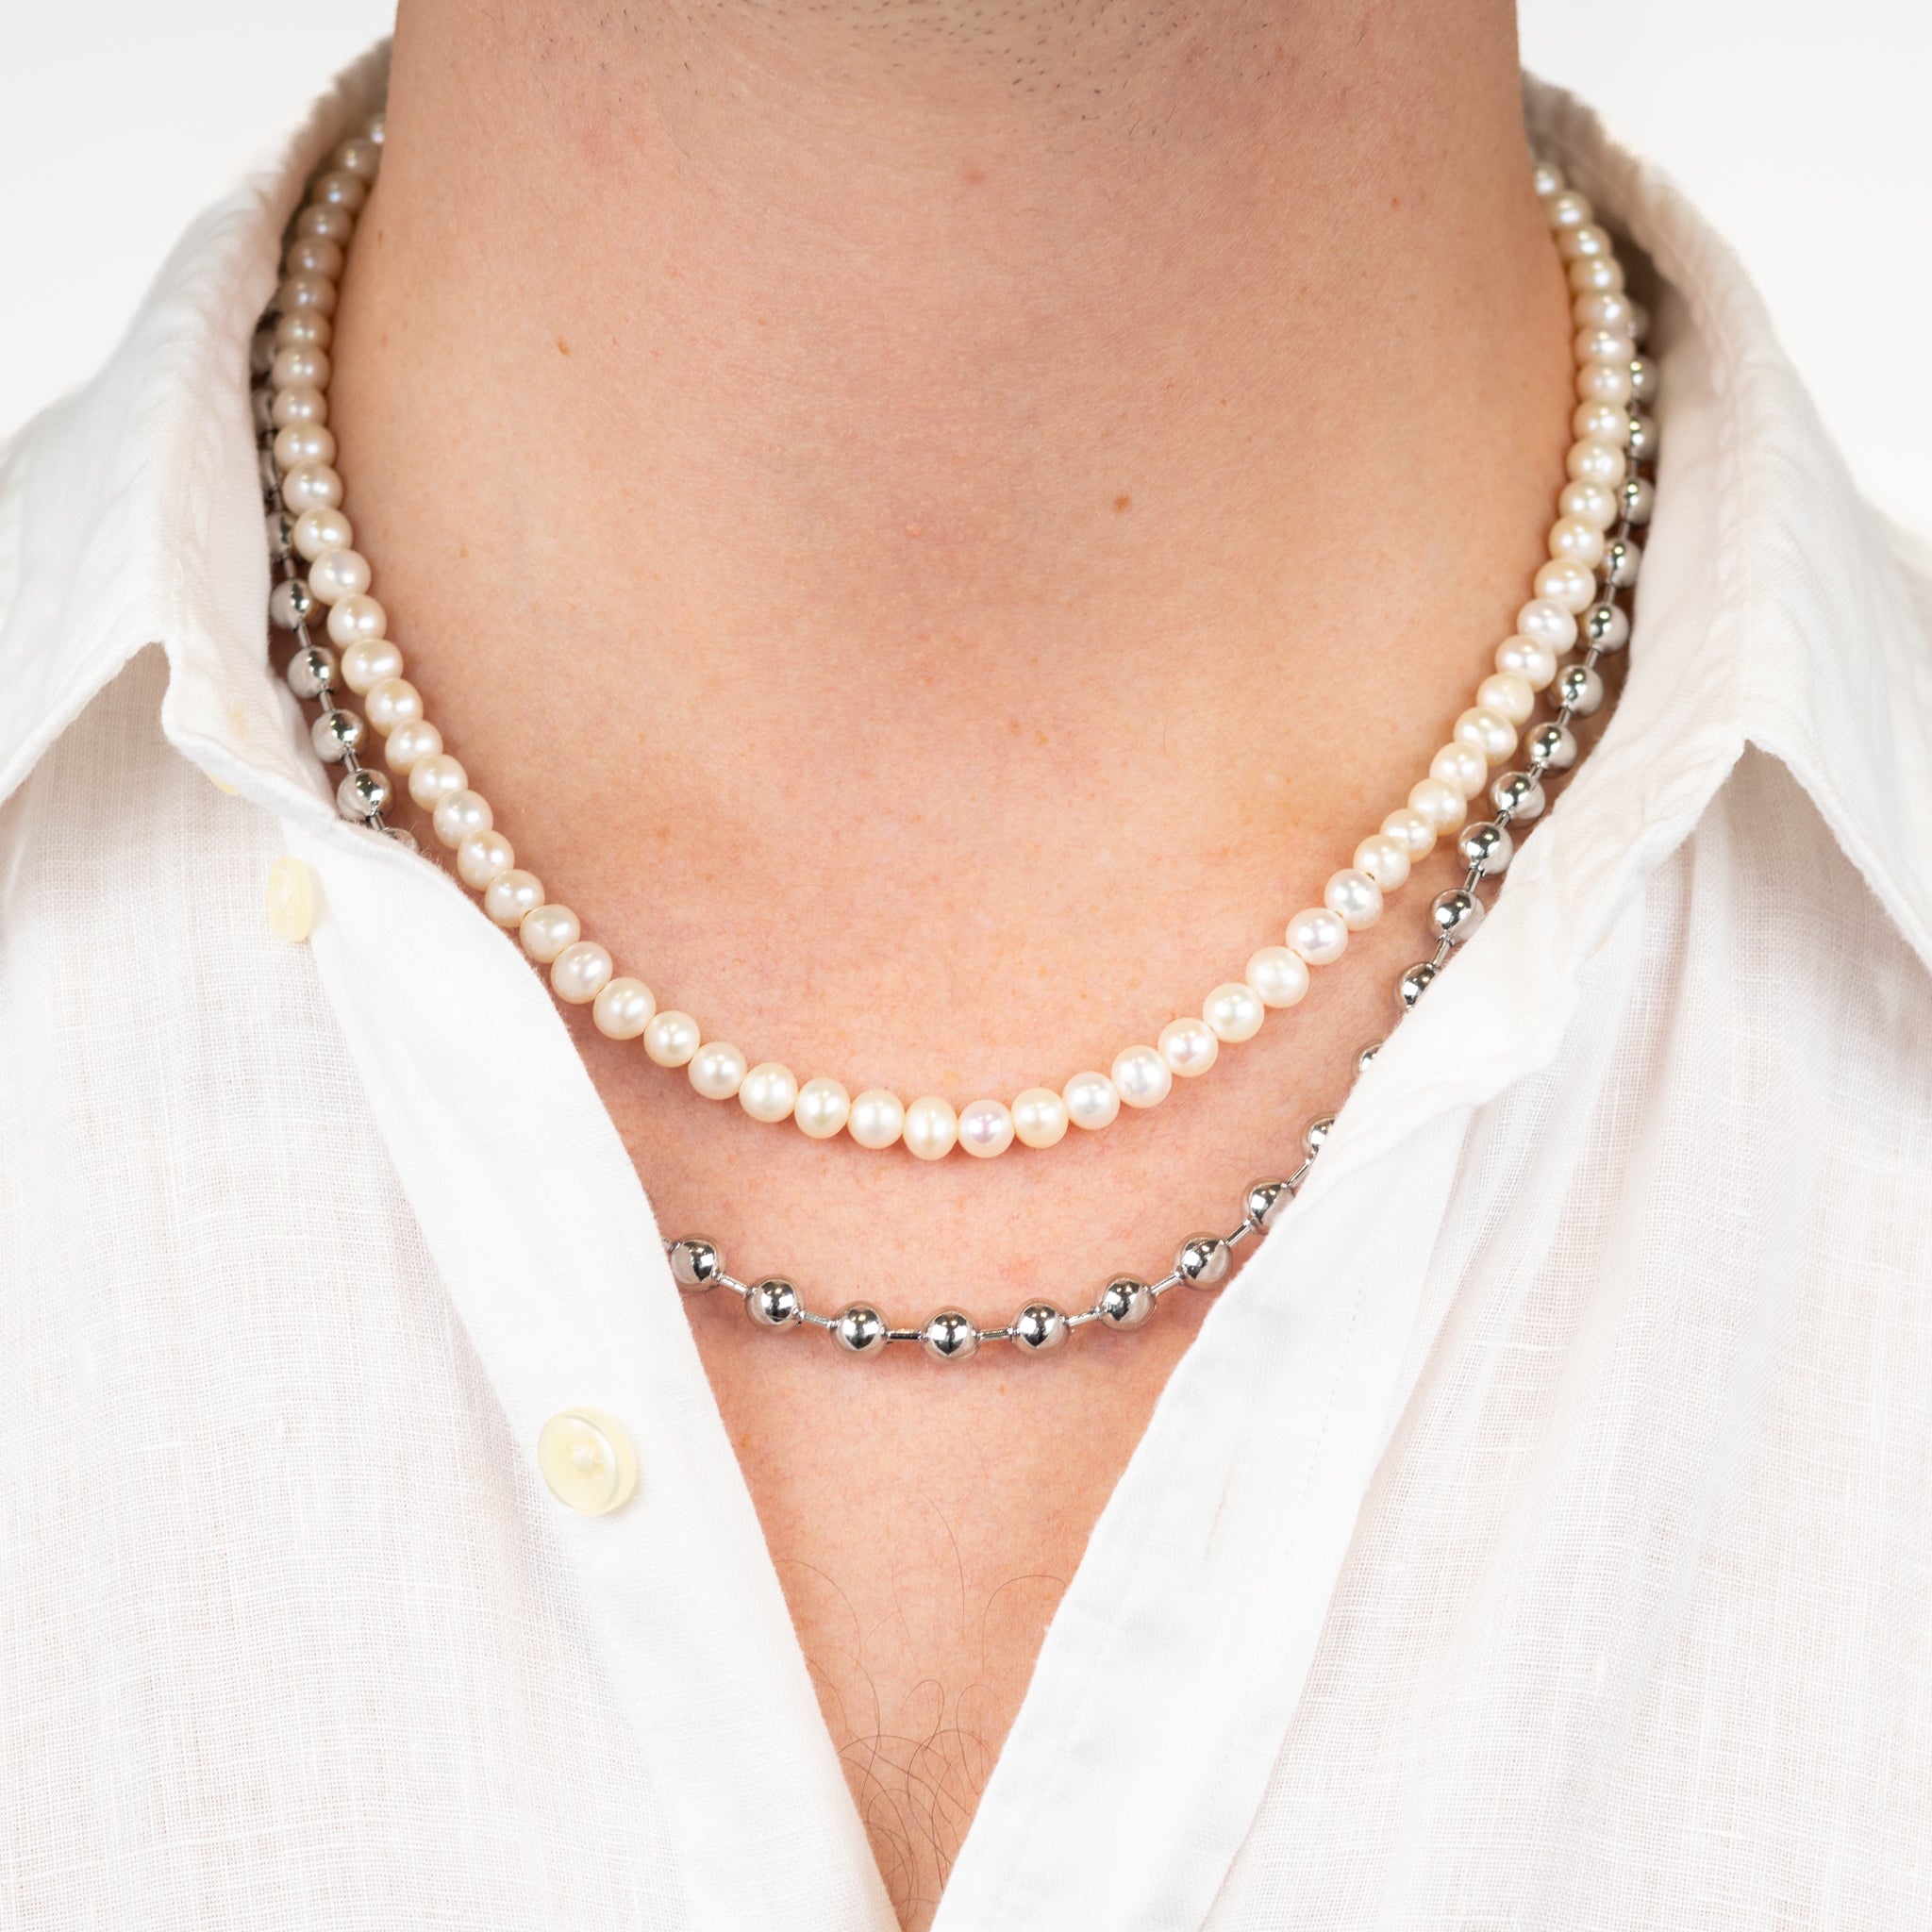 Stainless Steel and White Freshwater Pearl Double Ball Necklace